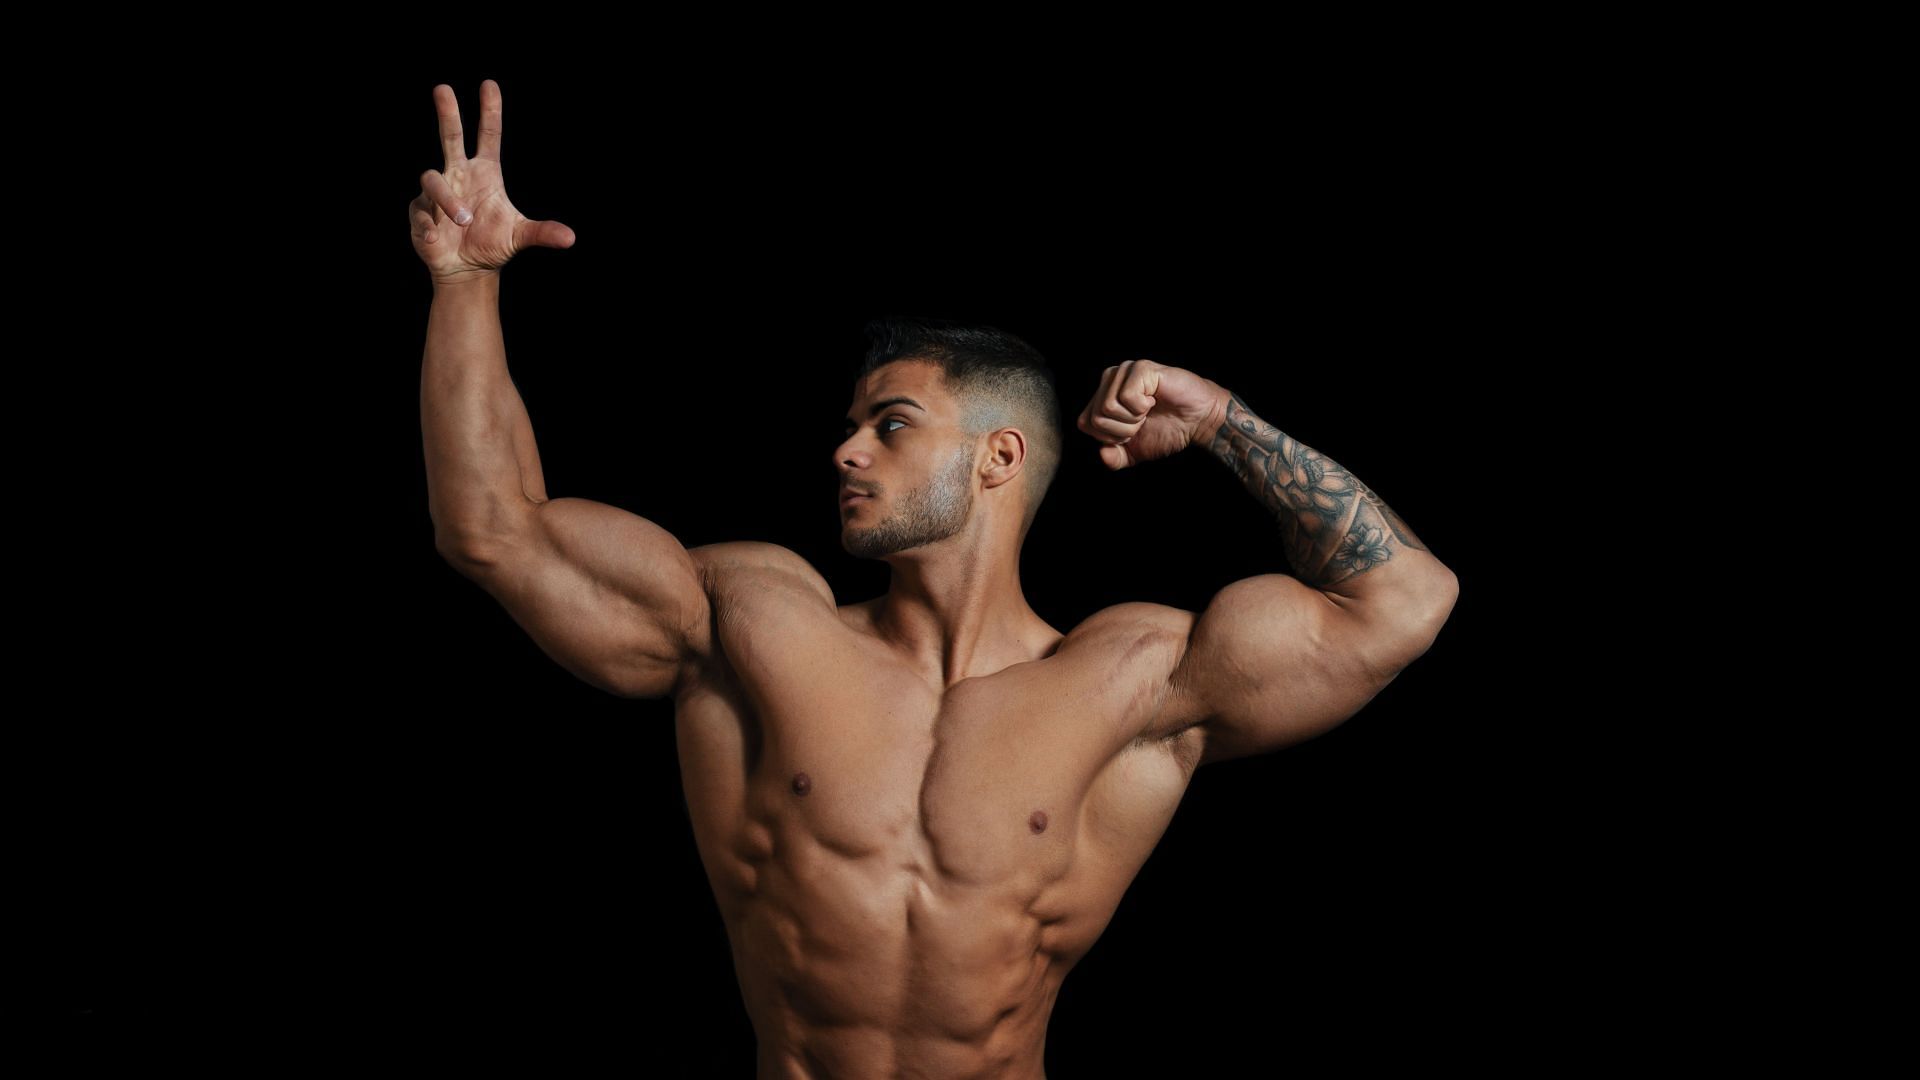 Want to know how to become a bodybuilder? These tips should help you. (Image via unsplash/Norbert Buduczki)